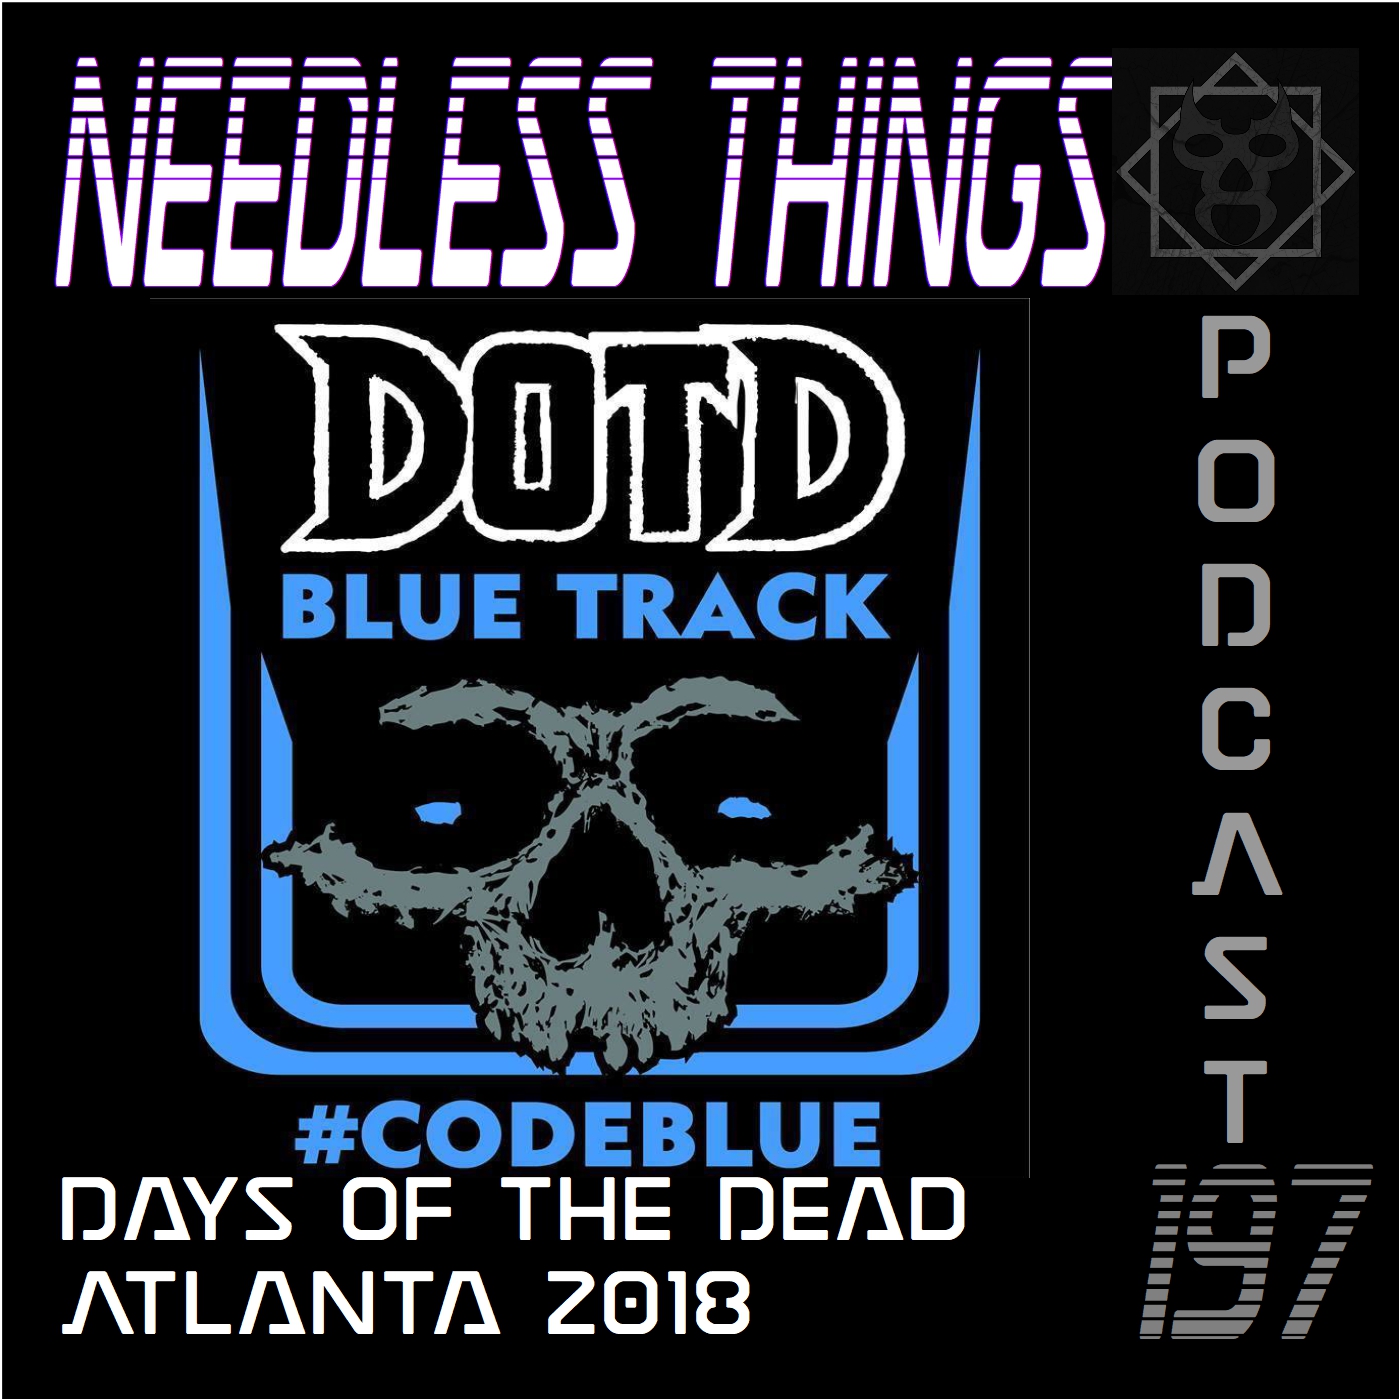 Needless Things Podcast 197 – Days of the Dead Atlanta 2018